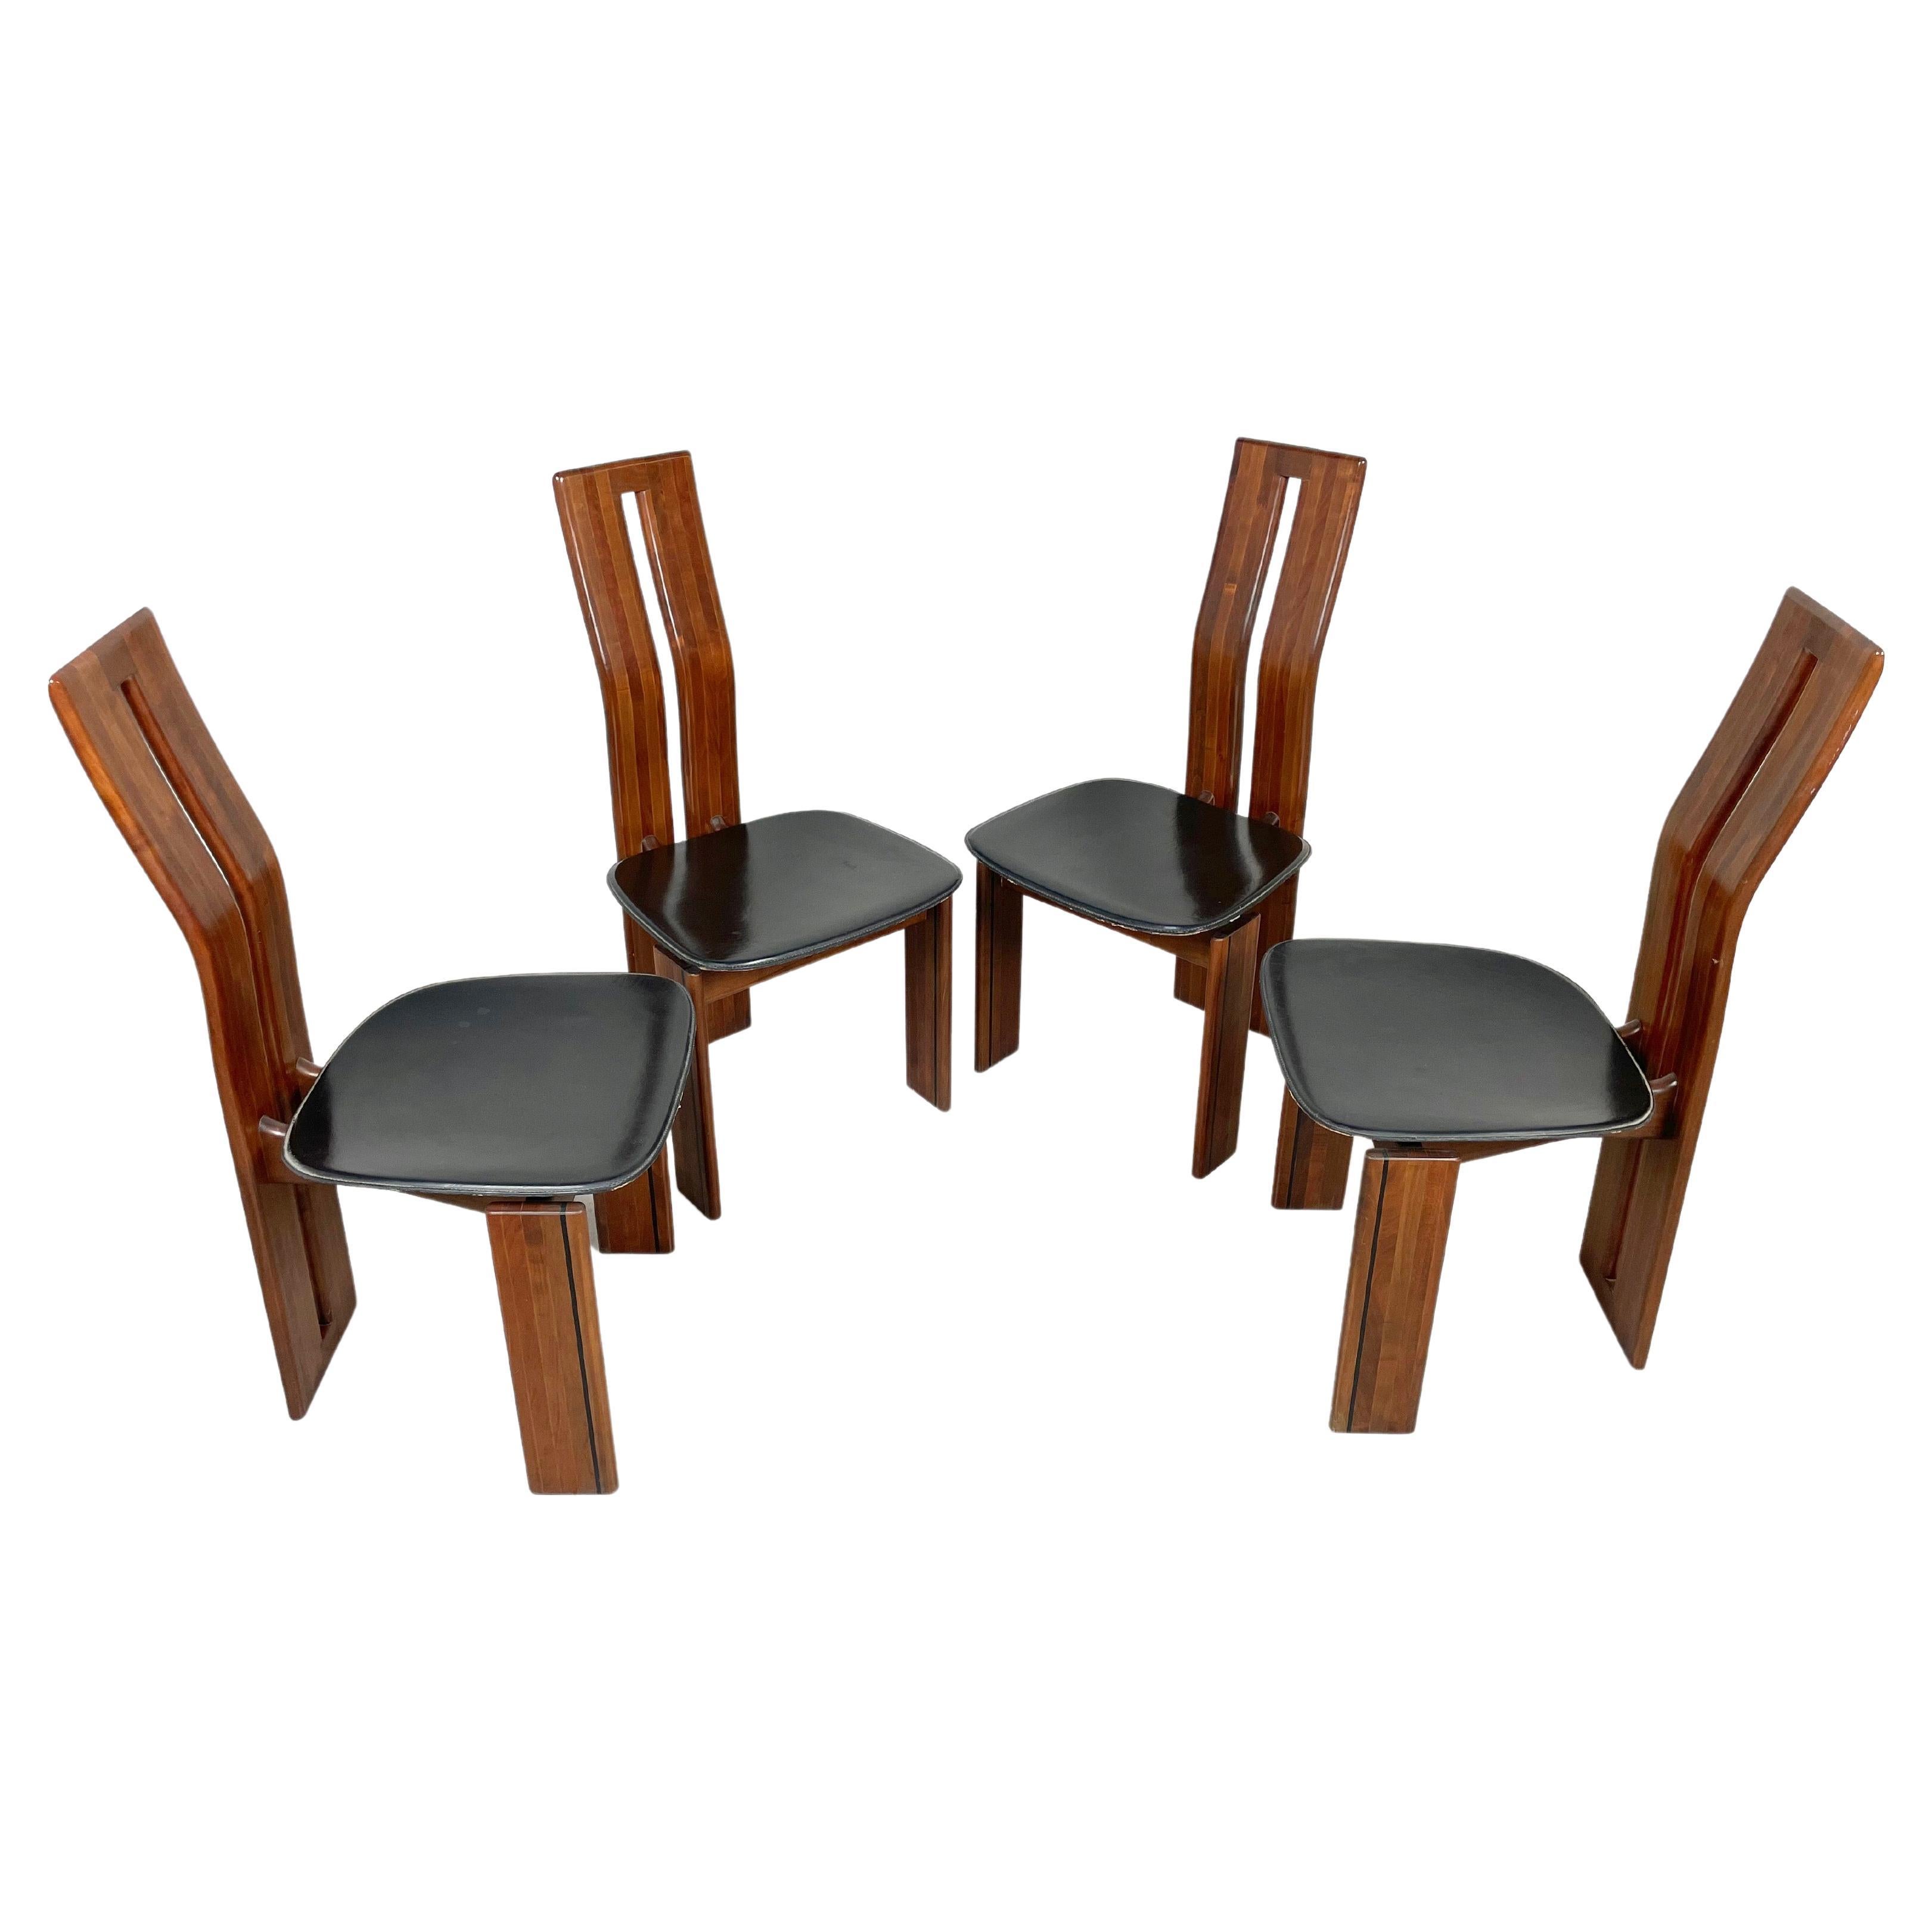 Set of Four Chairs Wood and Leather Mario Marenco for Mobil Girgi, Italy 1970s